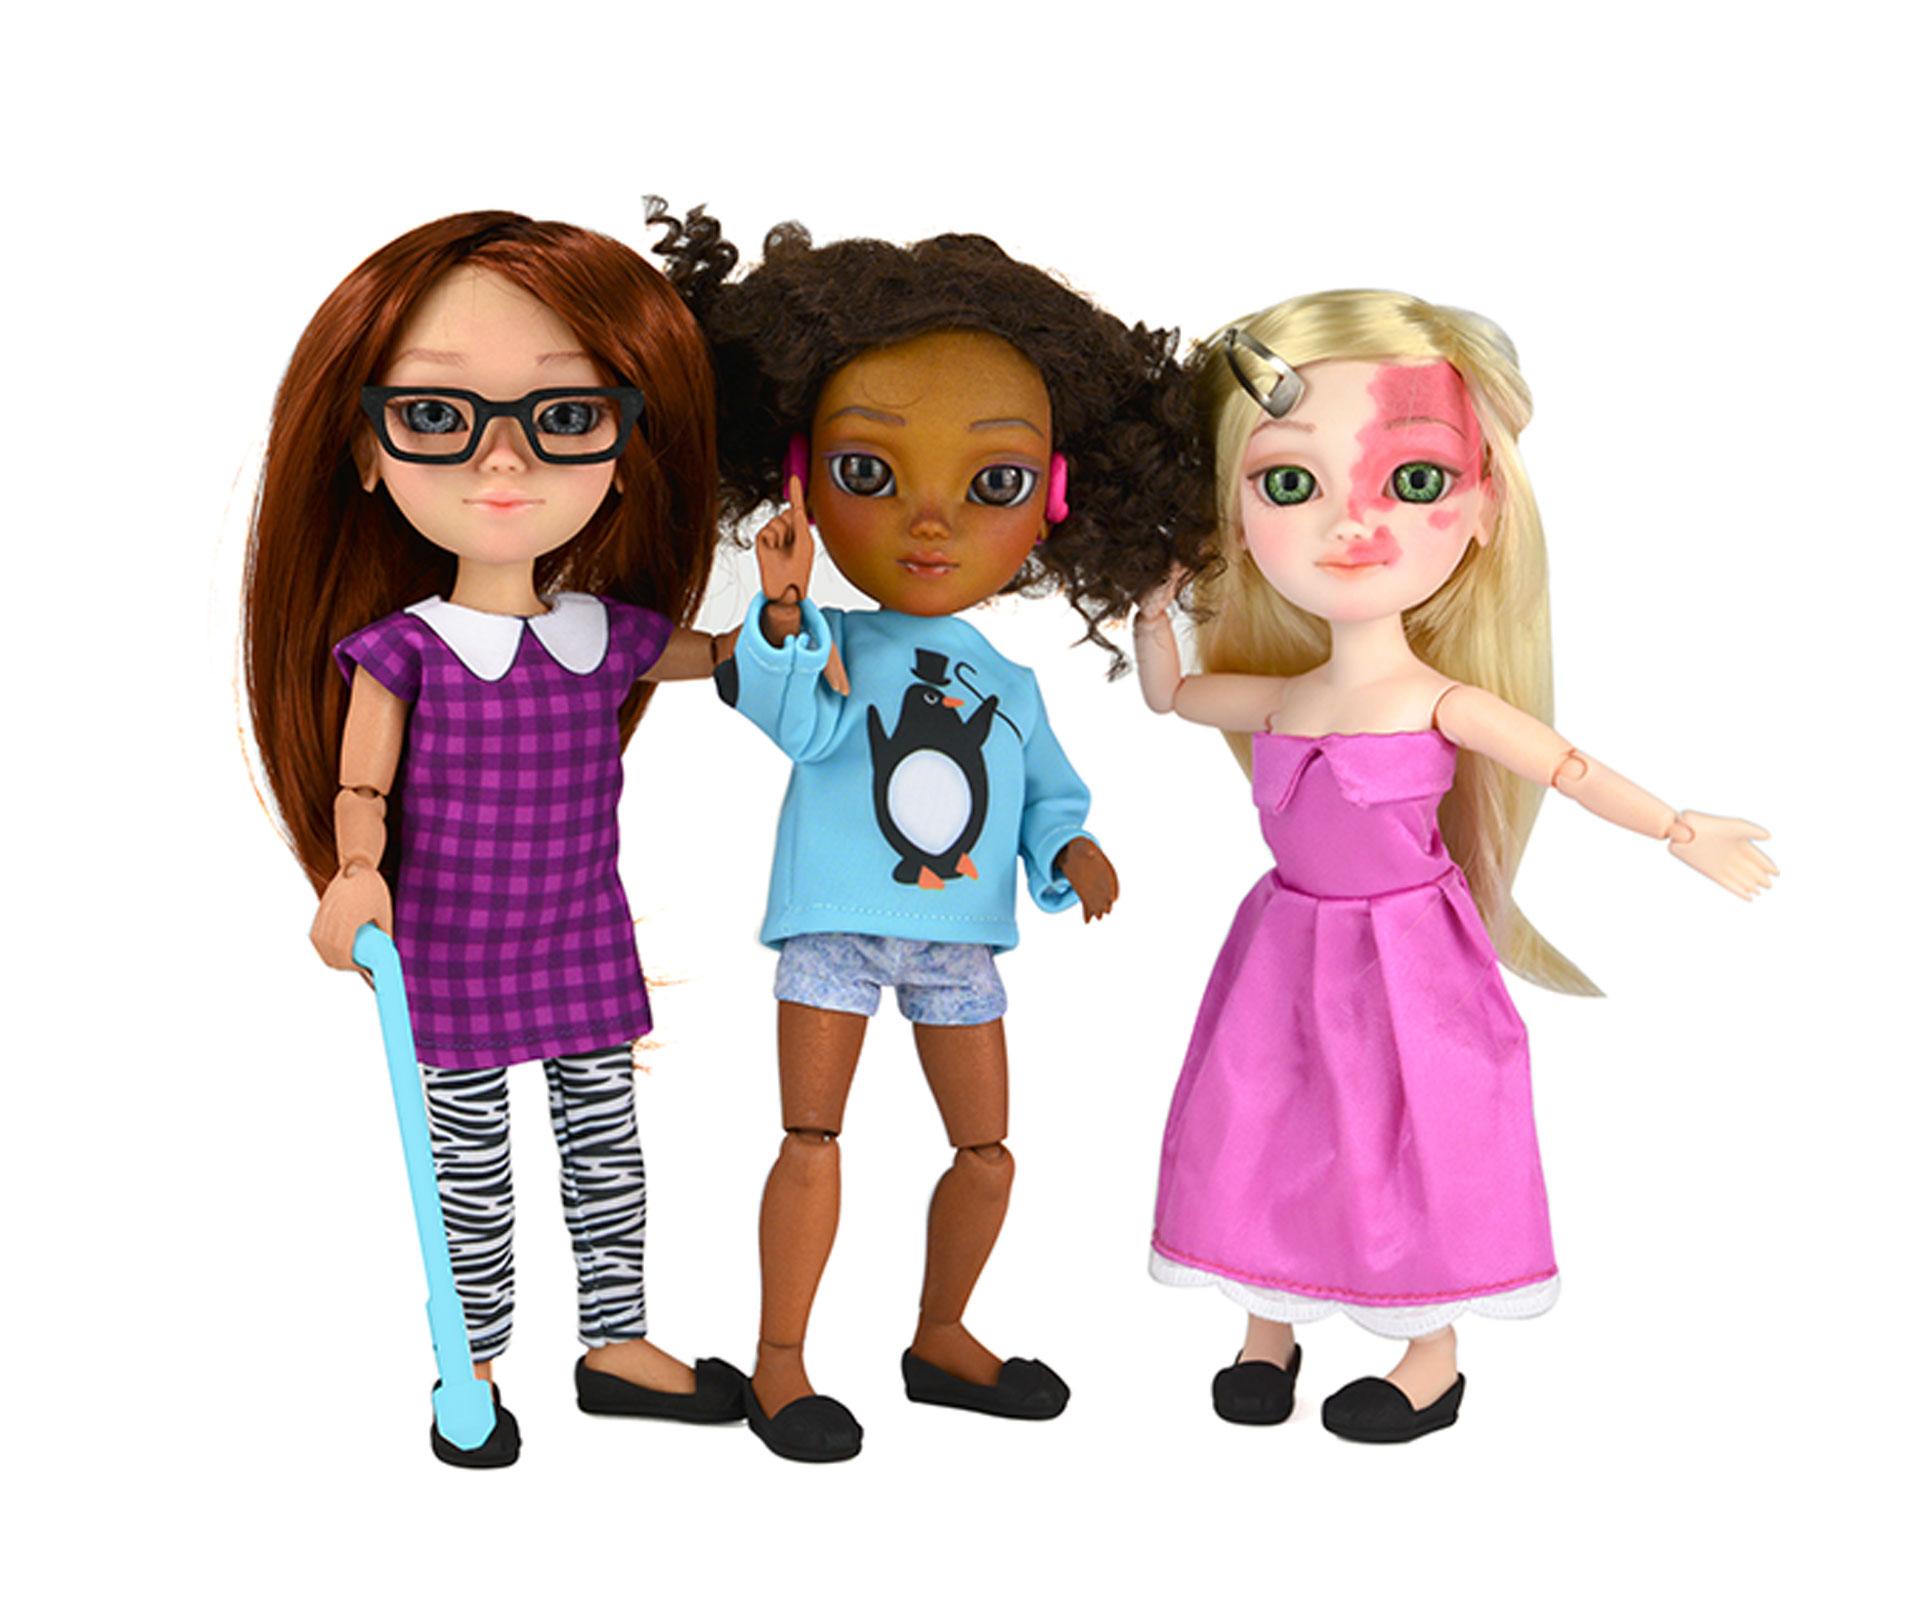 Toy company creates dolls with disabilities